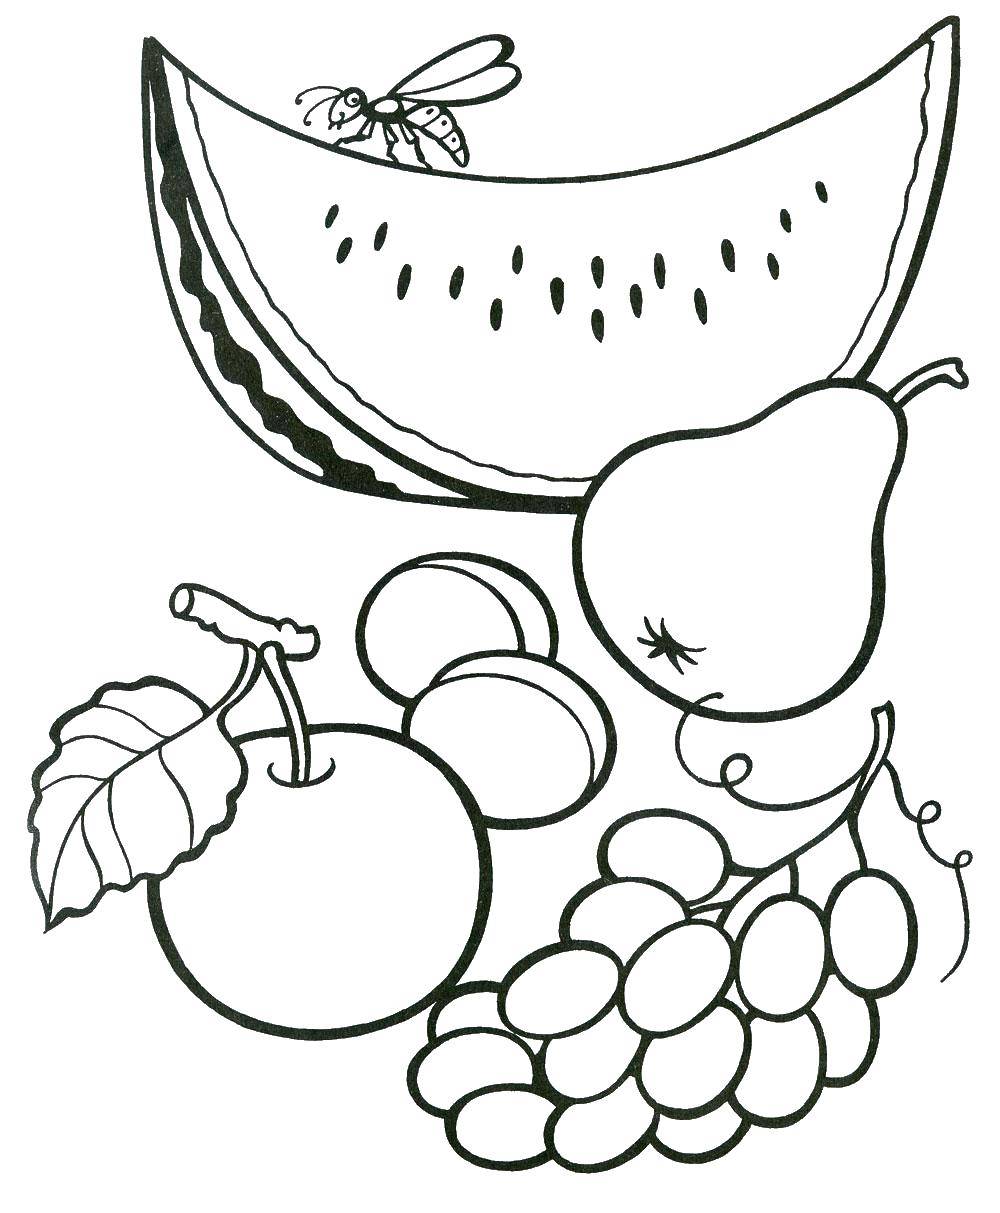 Coloring Fruits and berries. Category fruits. Tags:  fruits, berries.